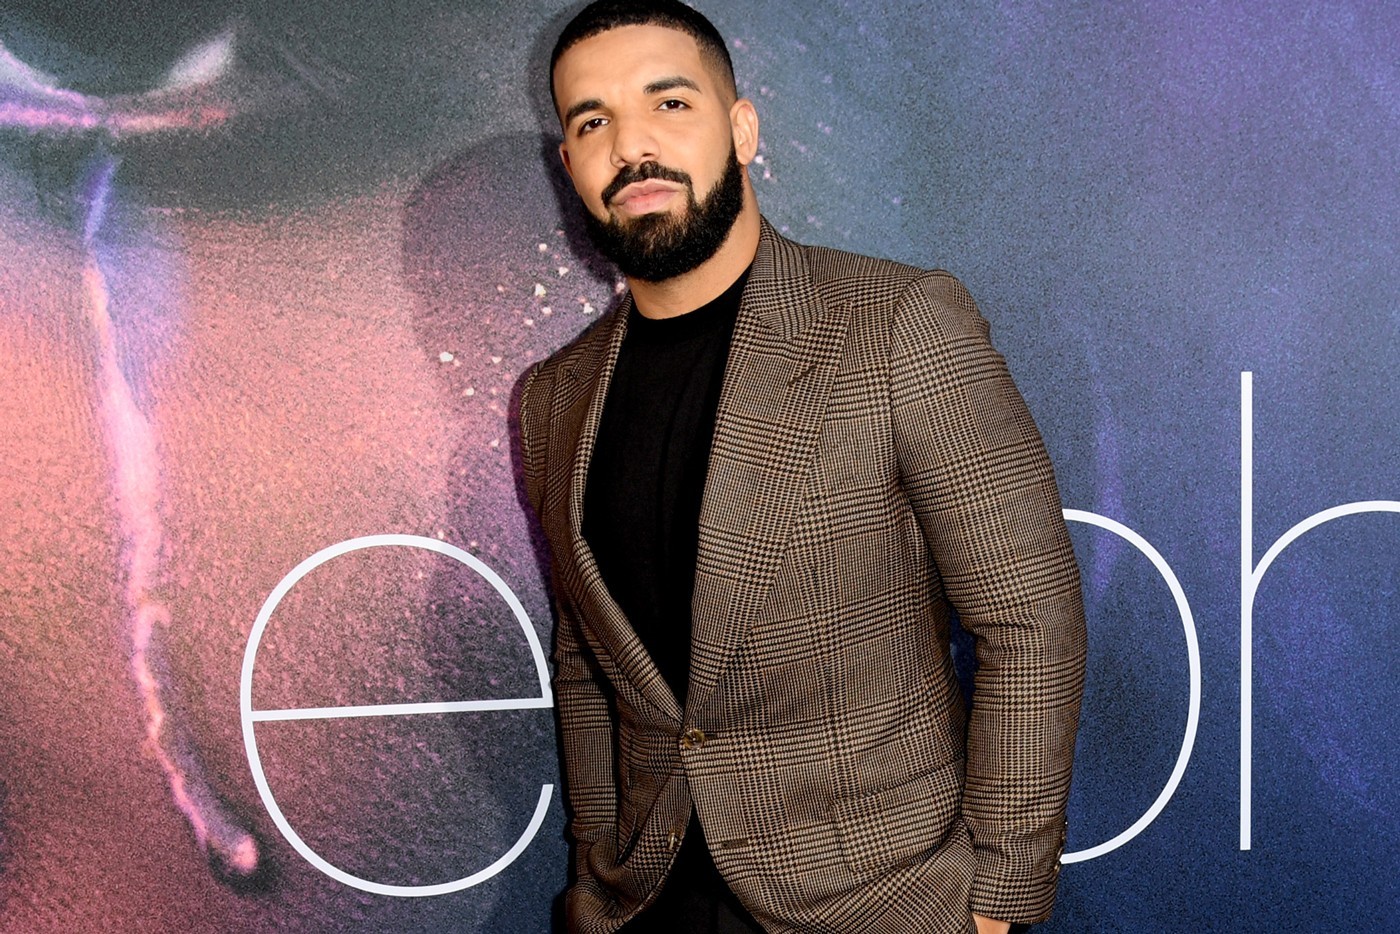 Drake Responds to Criticism of Him Looking Paranoid at Marcy Projects